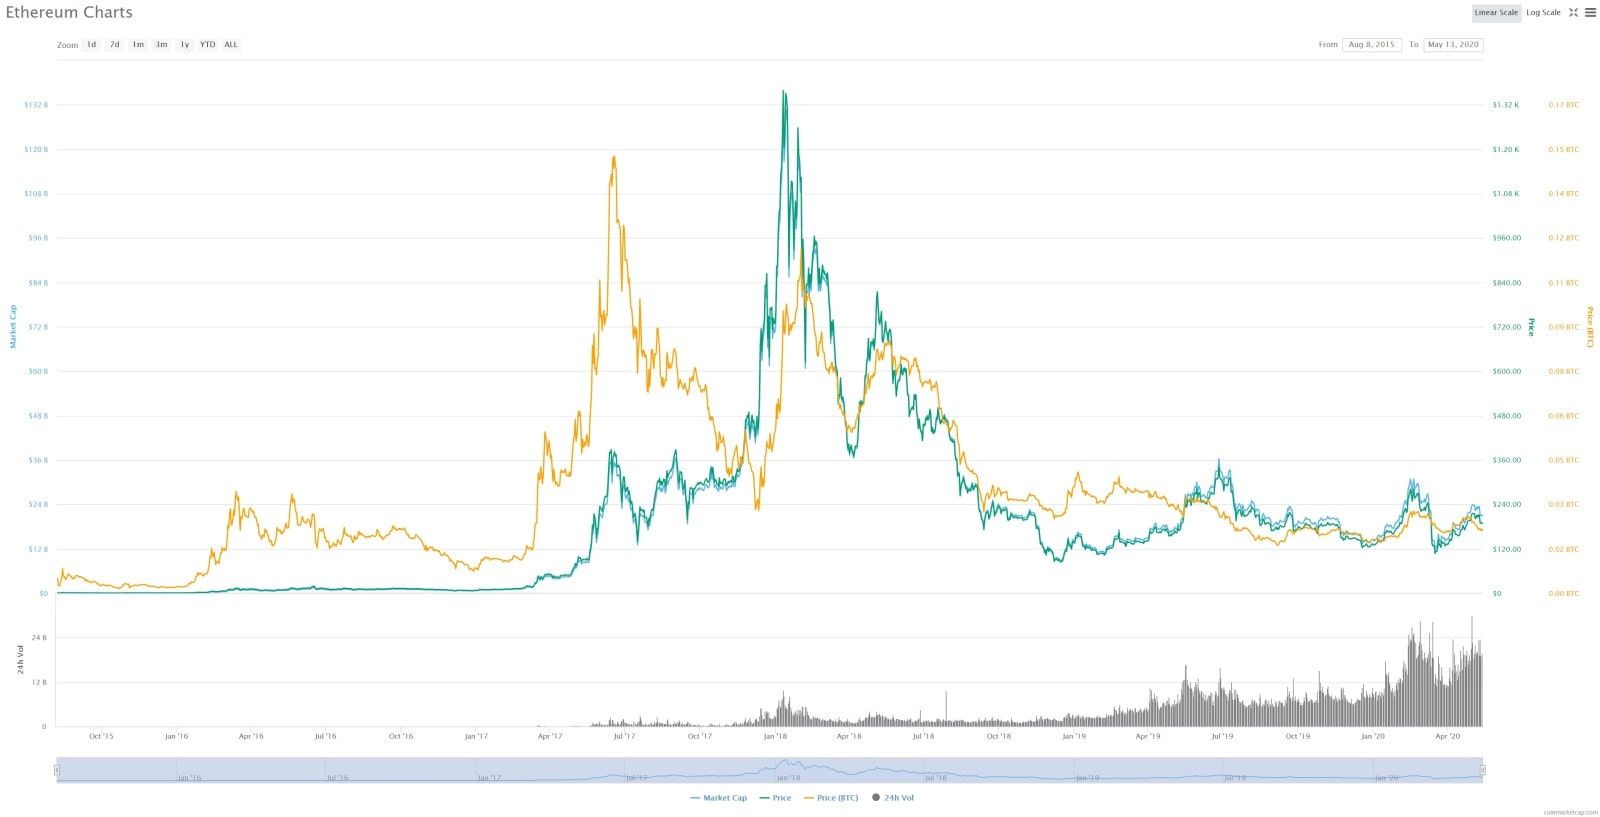 ETH price history in USD and BTC.